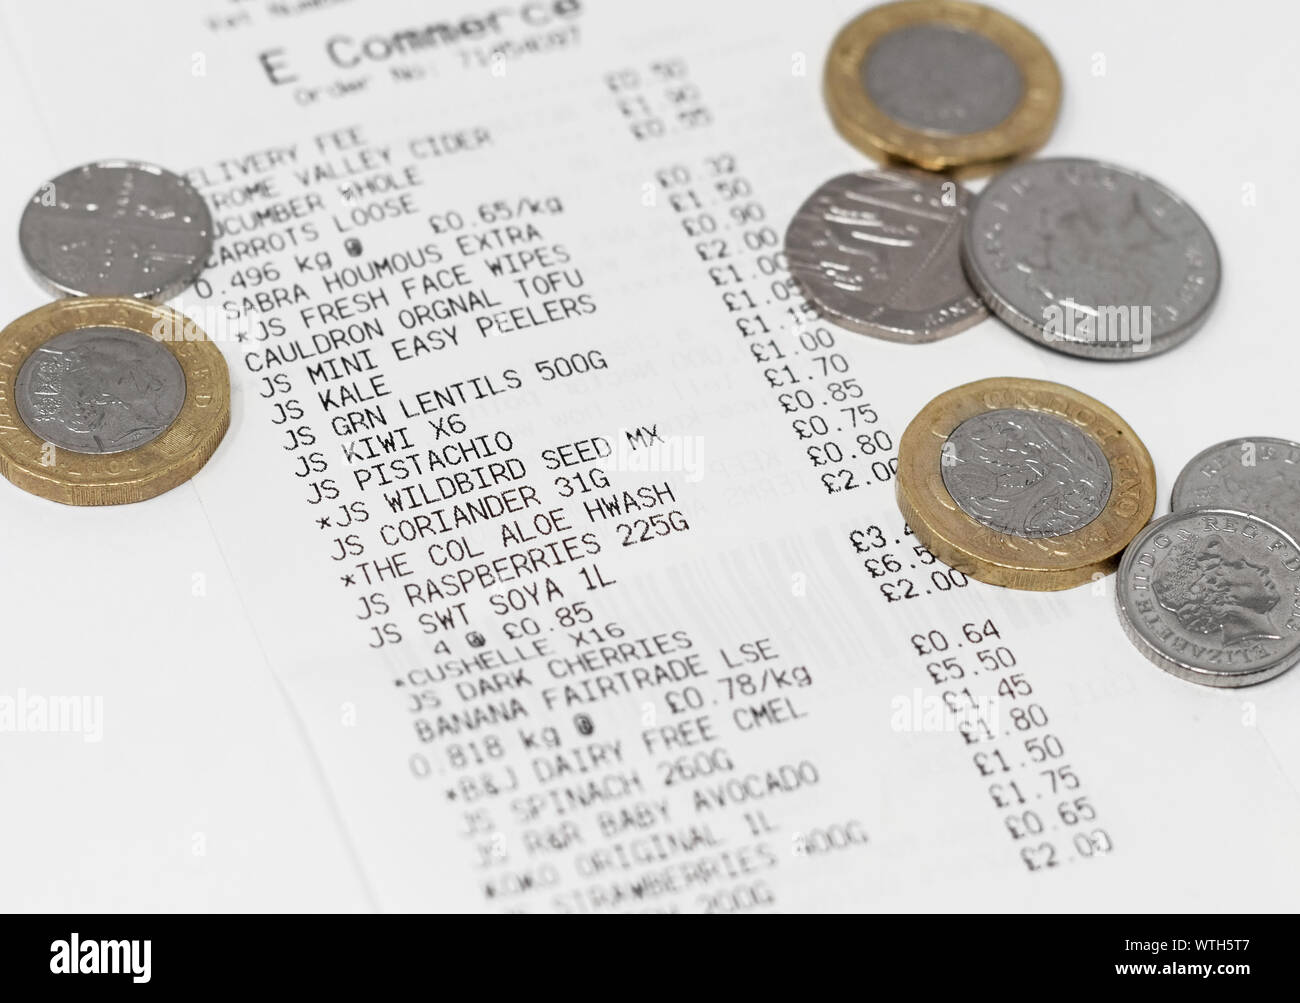 London / UK - September 9th 2019 - Grocery shopping receipt and money, closeup with a shallow depth of field Stock Photo